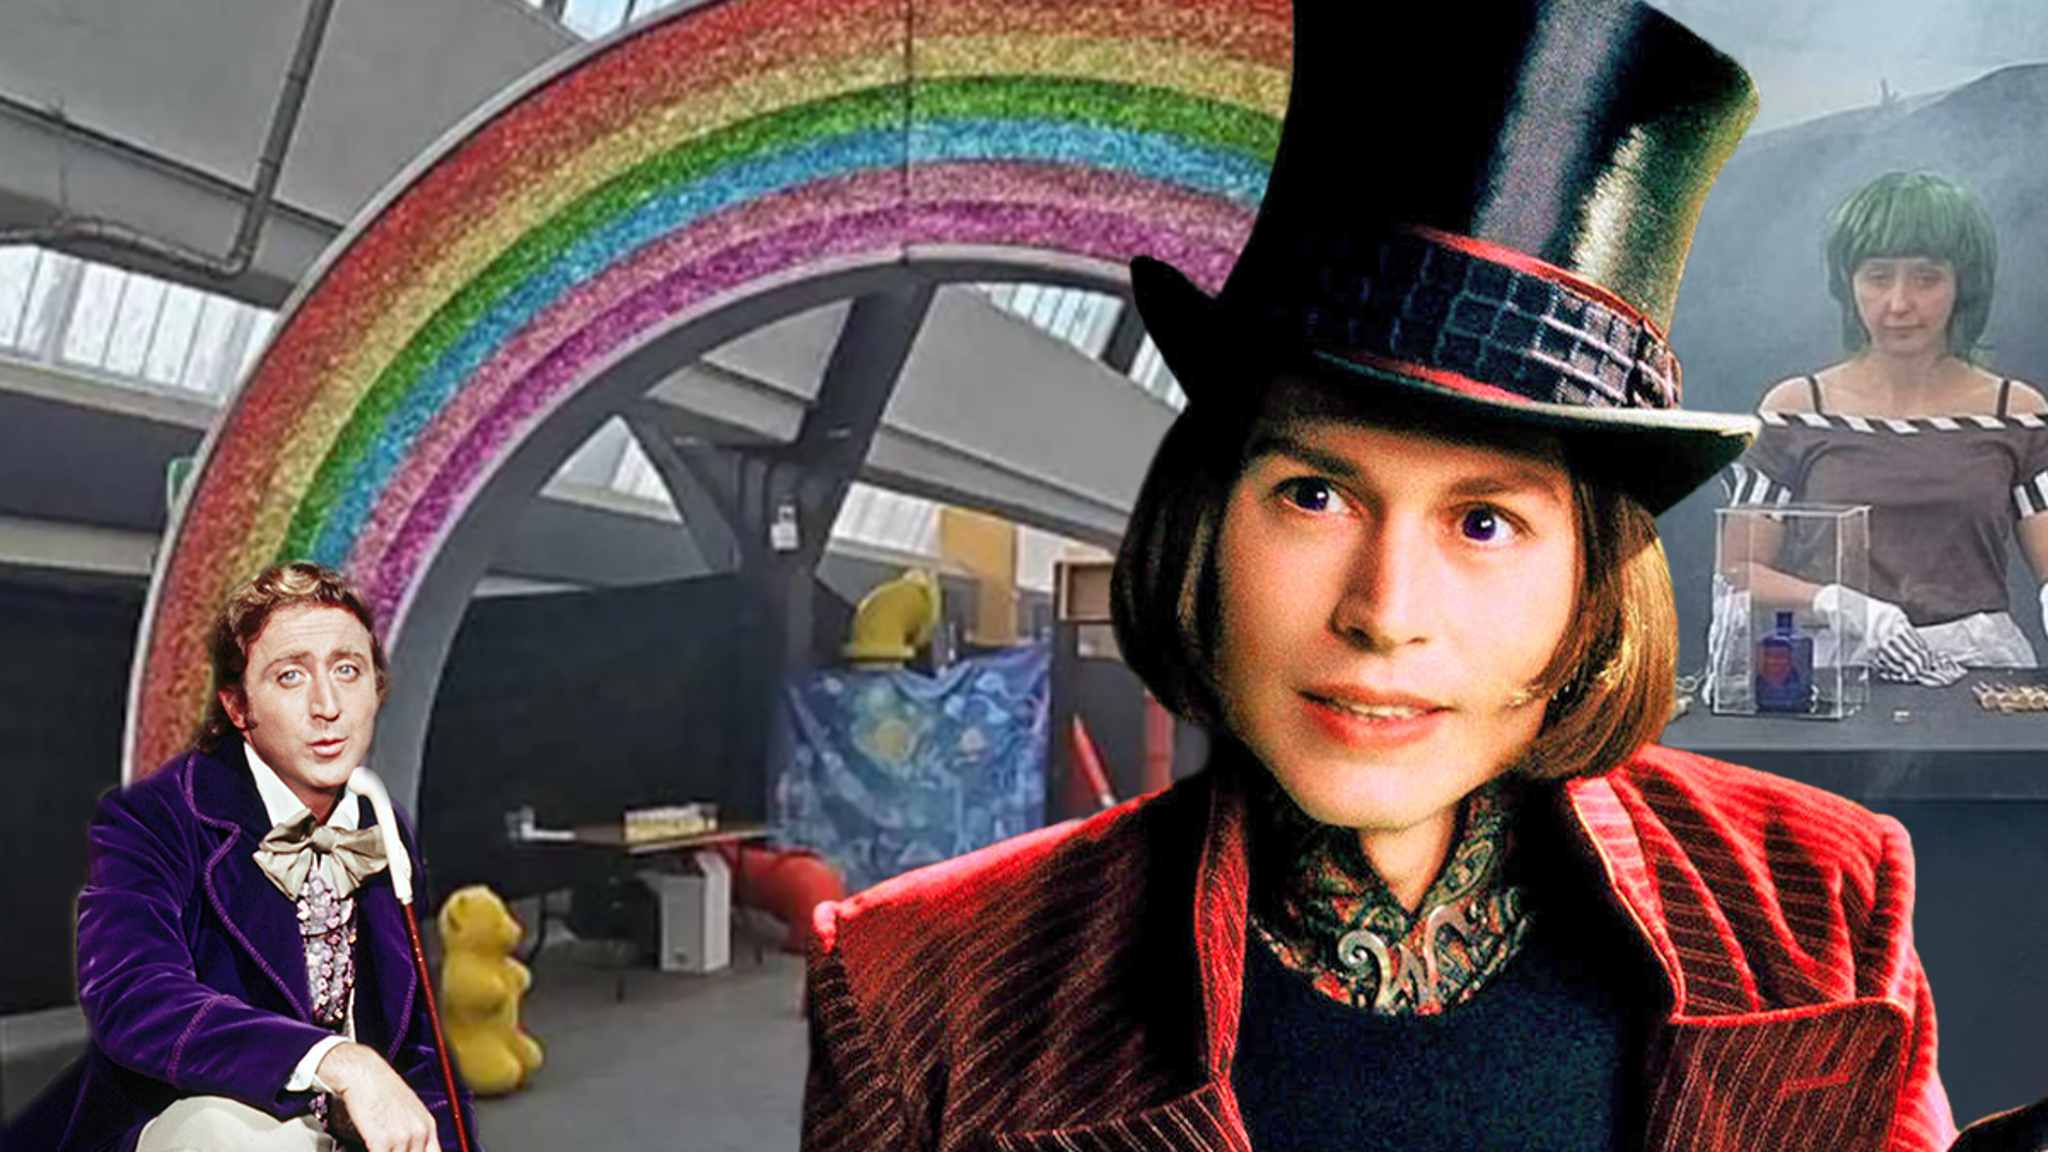 ‘Wonka’ Experience Script Not Even Close To Reality, Hilariously Bad